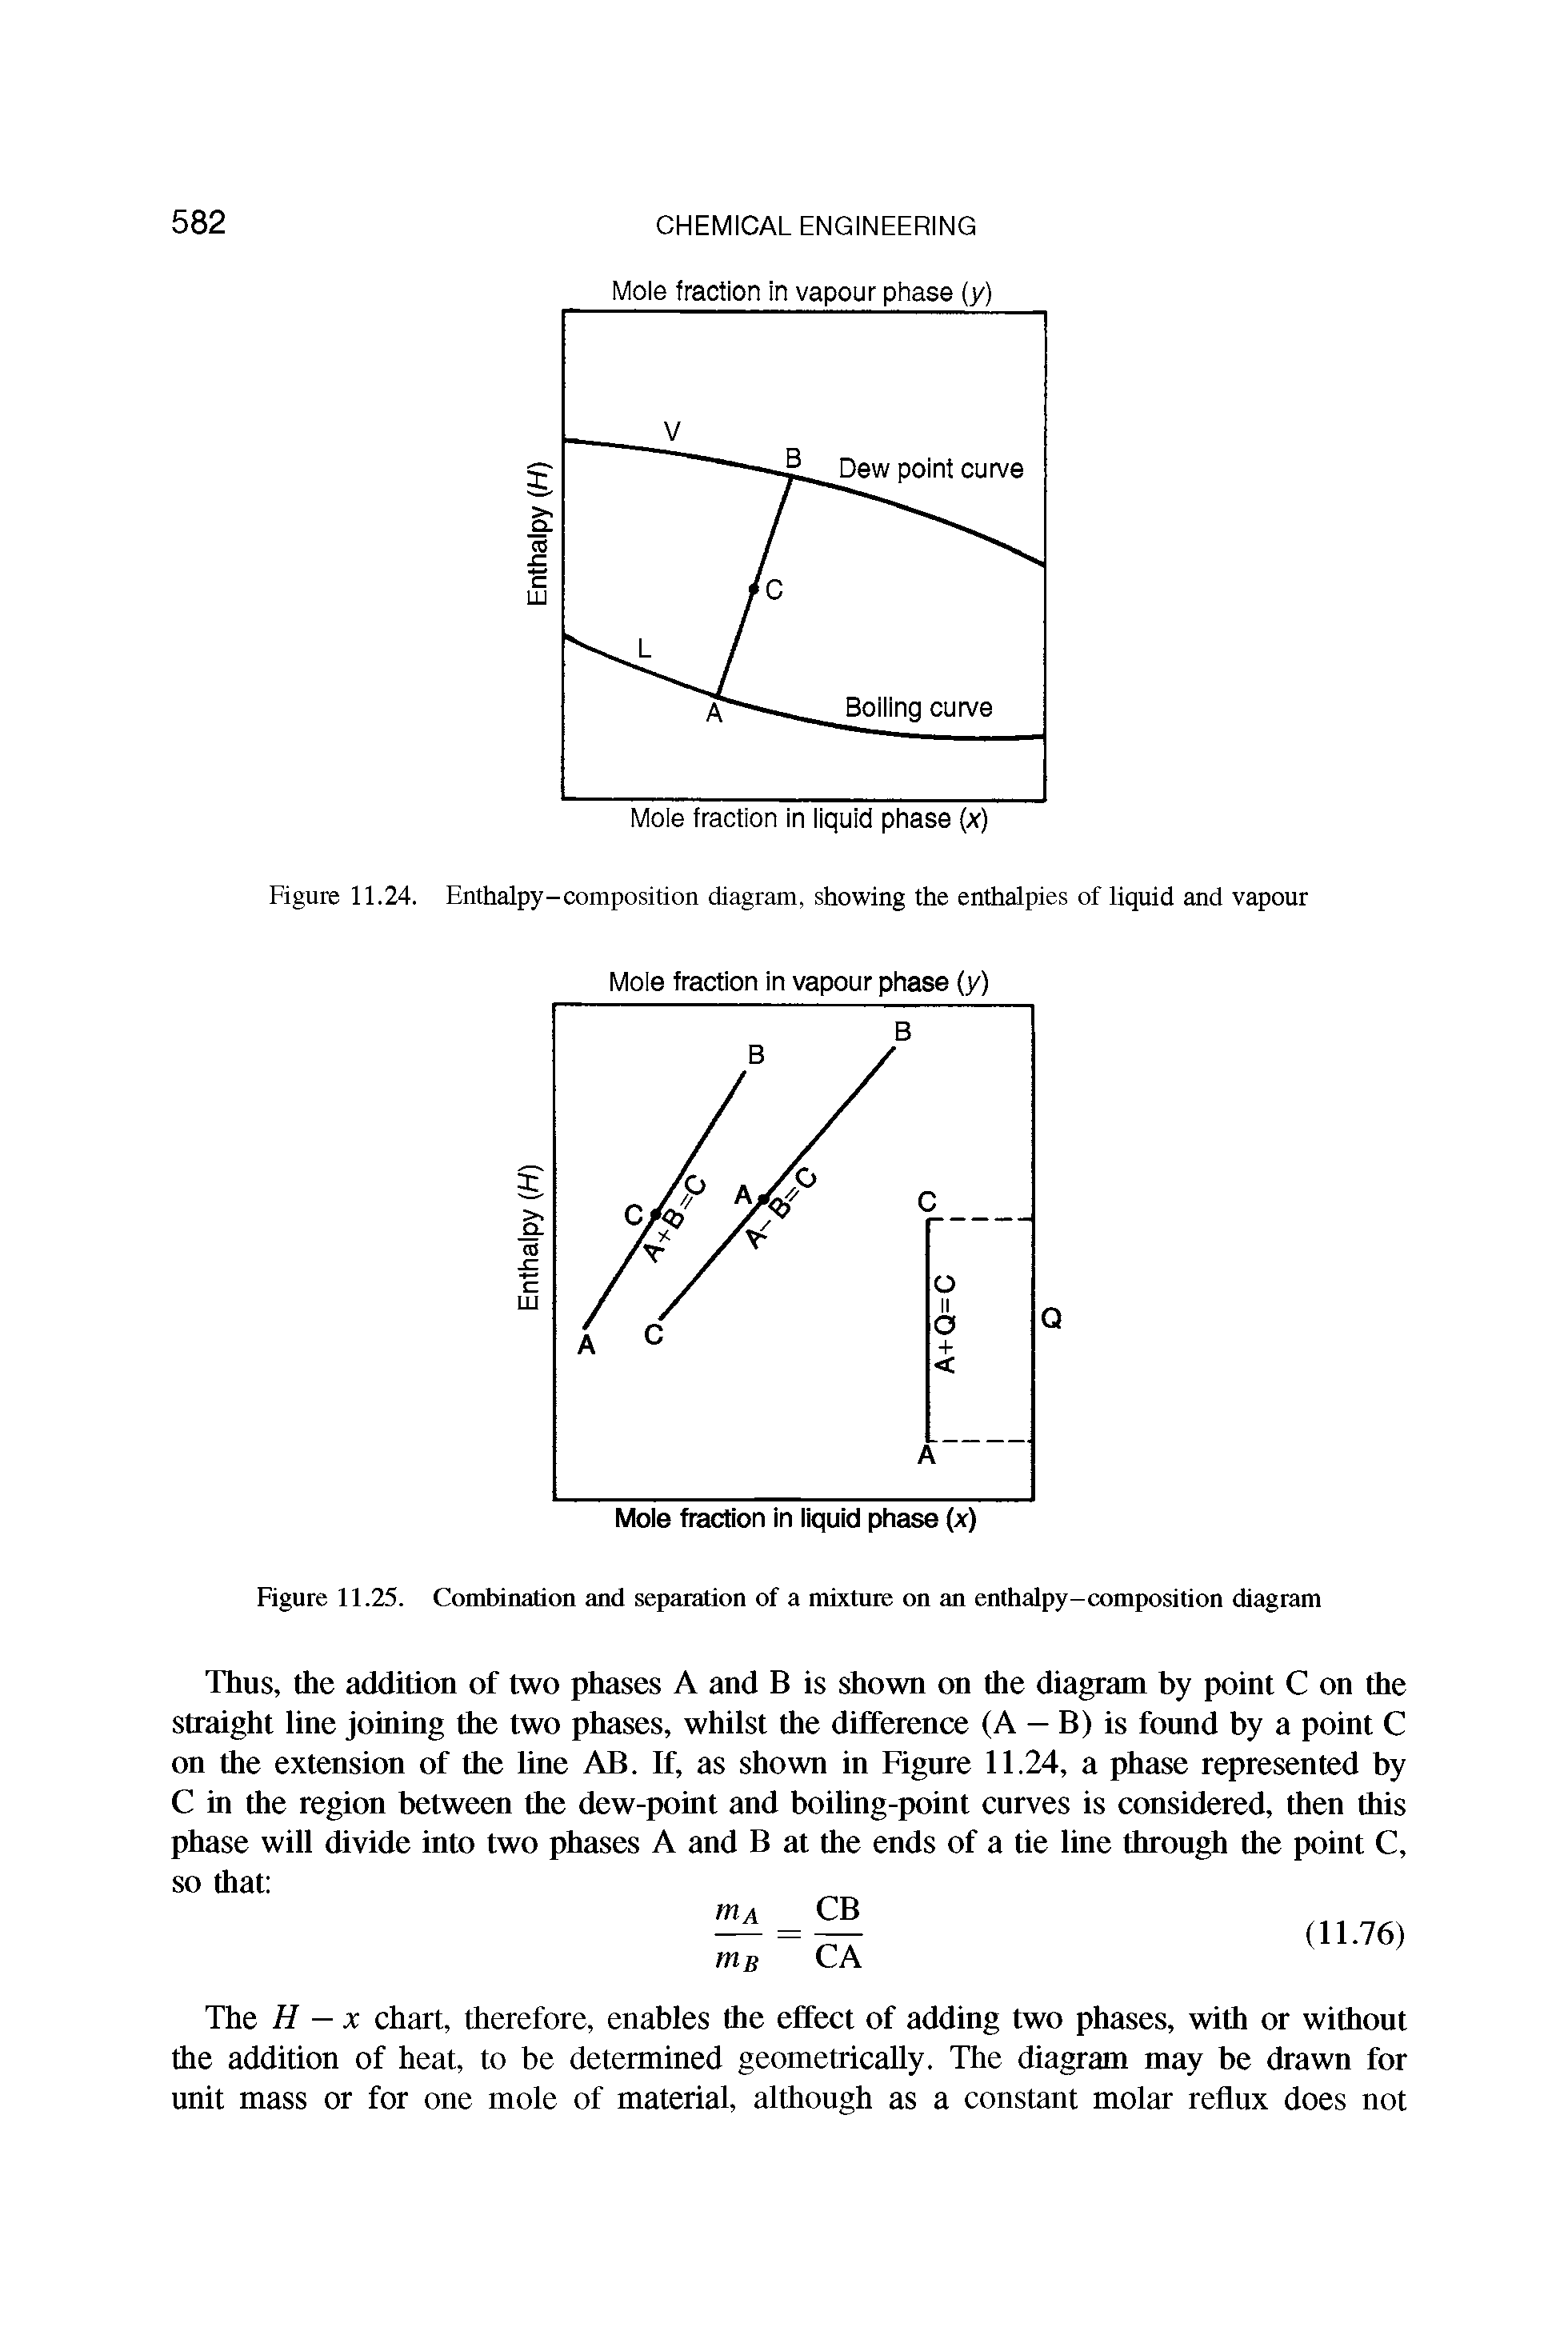 Figure 11.25. Combination and separation of a mixture on an enthalpy-composition diagram...